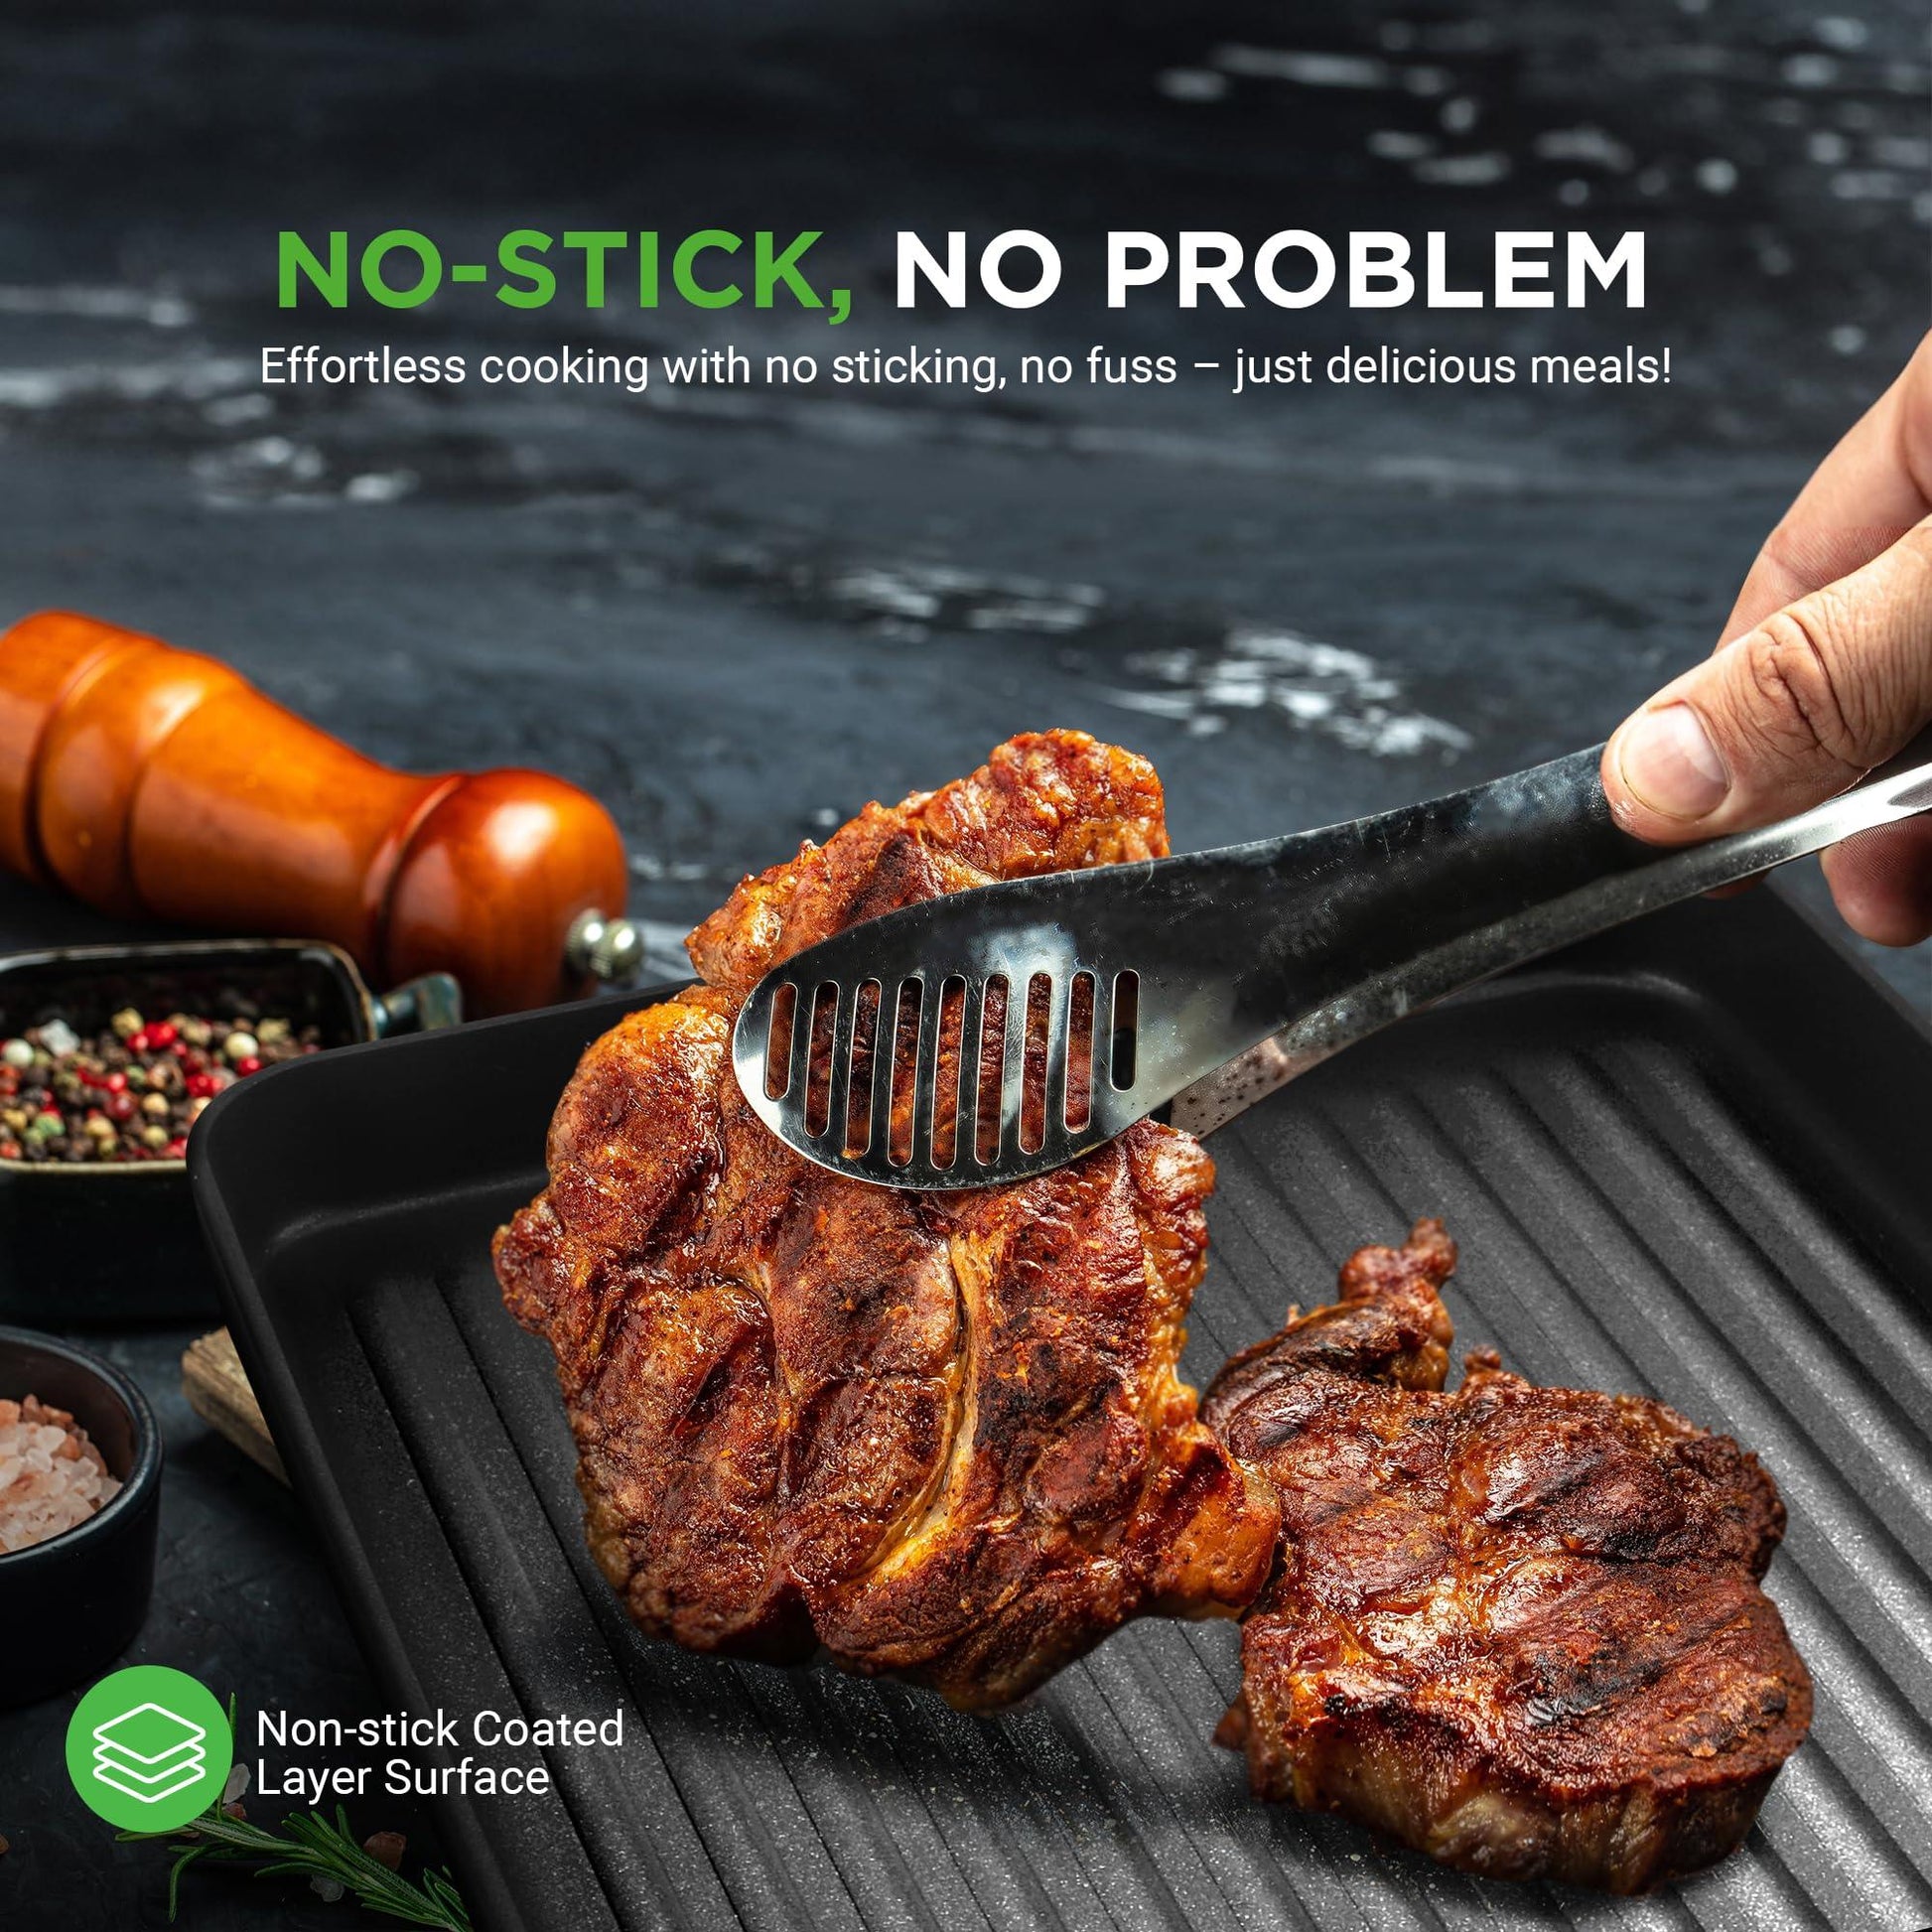 NutriChef Nonstick Stove Top Grill Pan - PTFE/PFOA/PFOS Free 11" Hard-Anodized Non stick Grill & Griddle Pan - Kitchen Cookware,High Ridges, Strong Riveted Handles, Dishwasher Safe NCGRP38 - CookCave